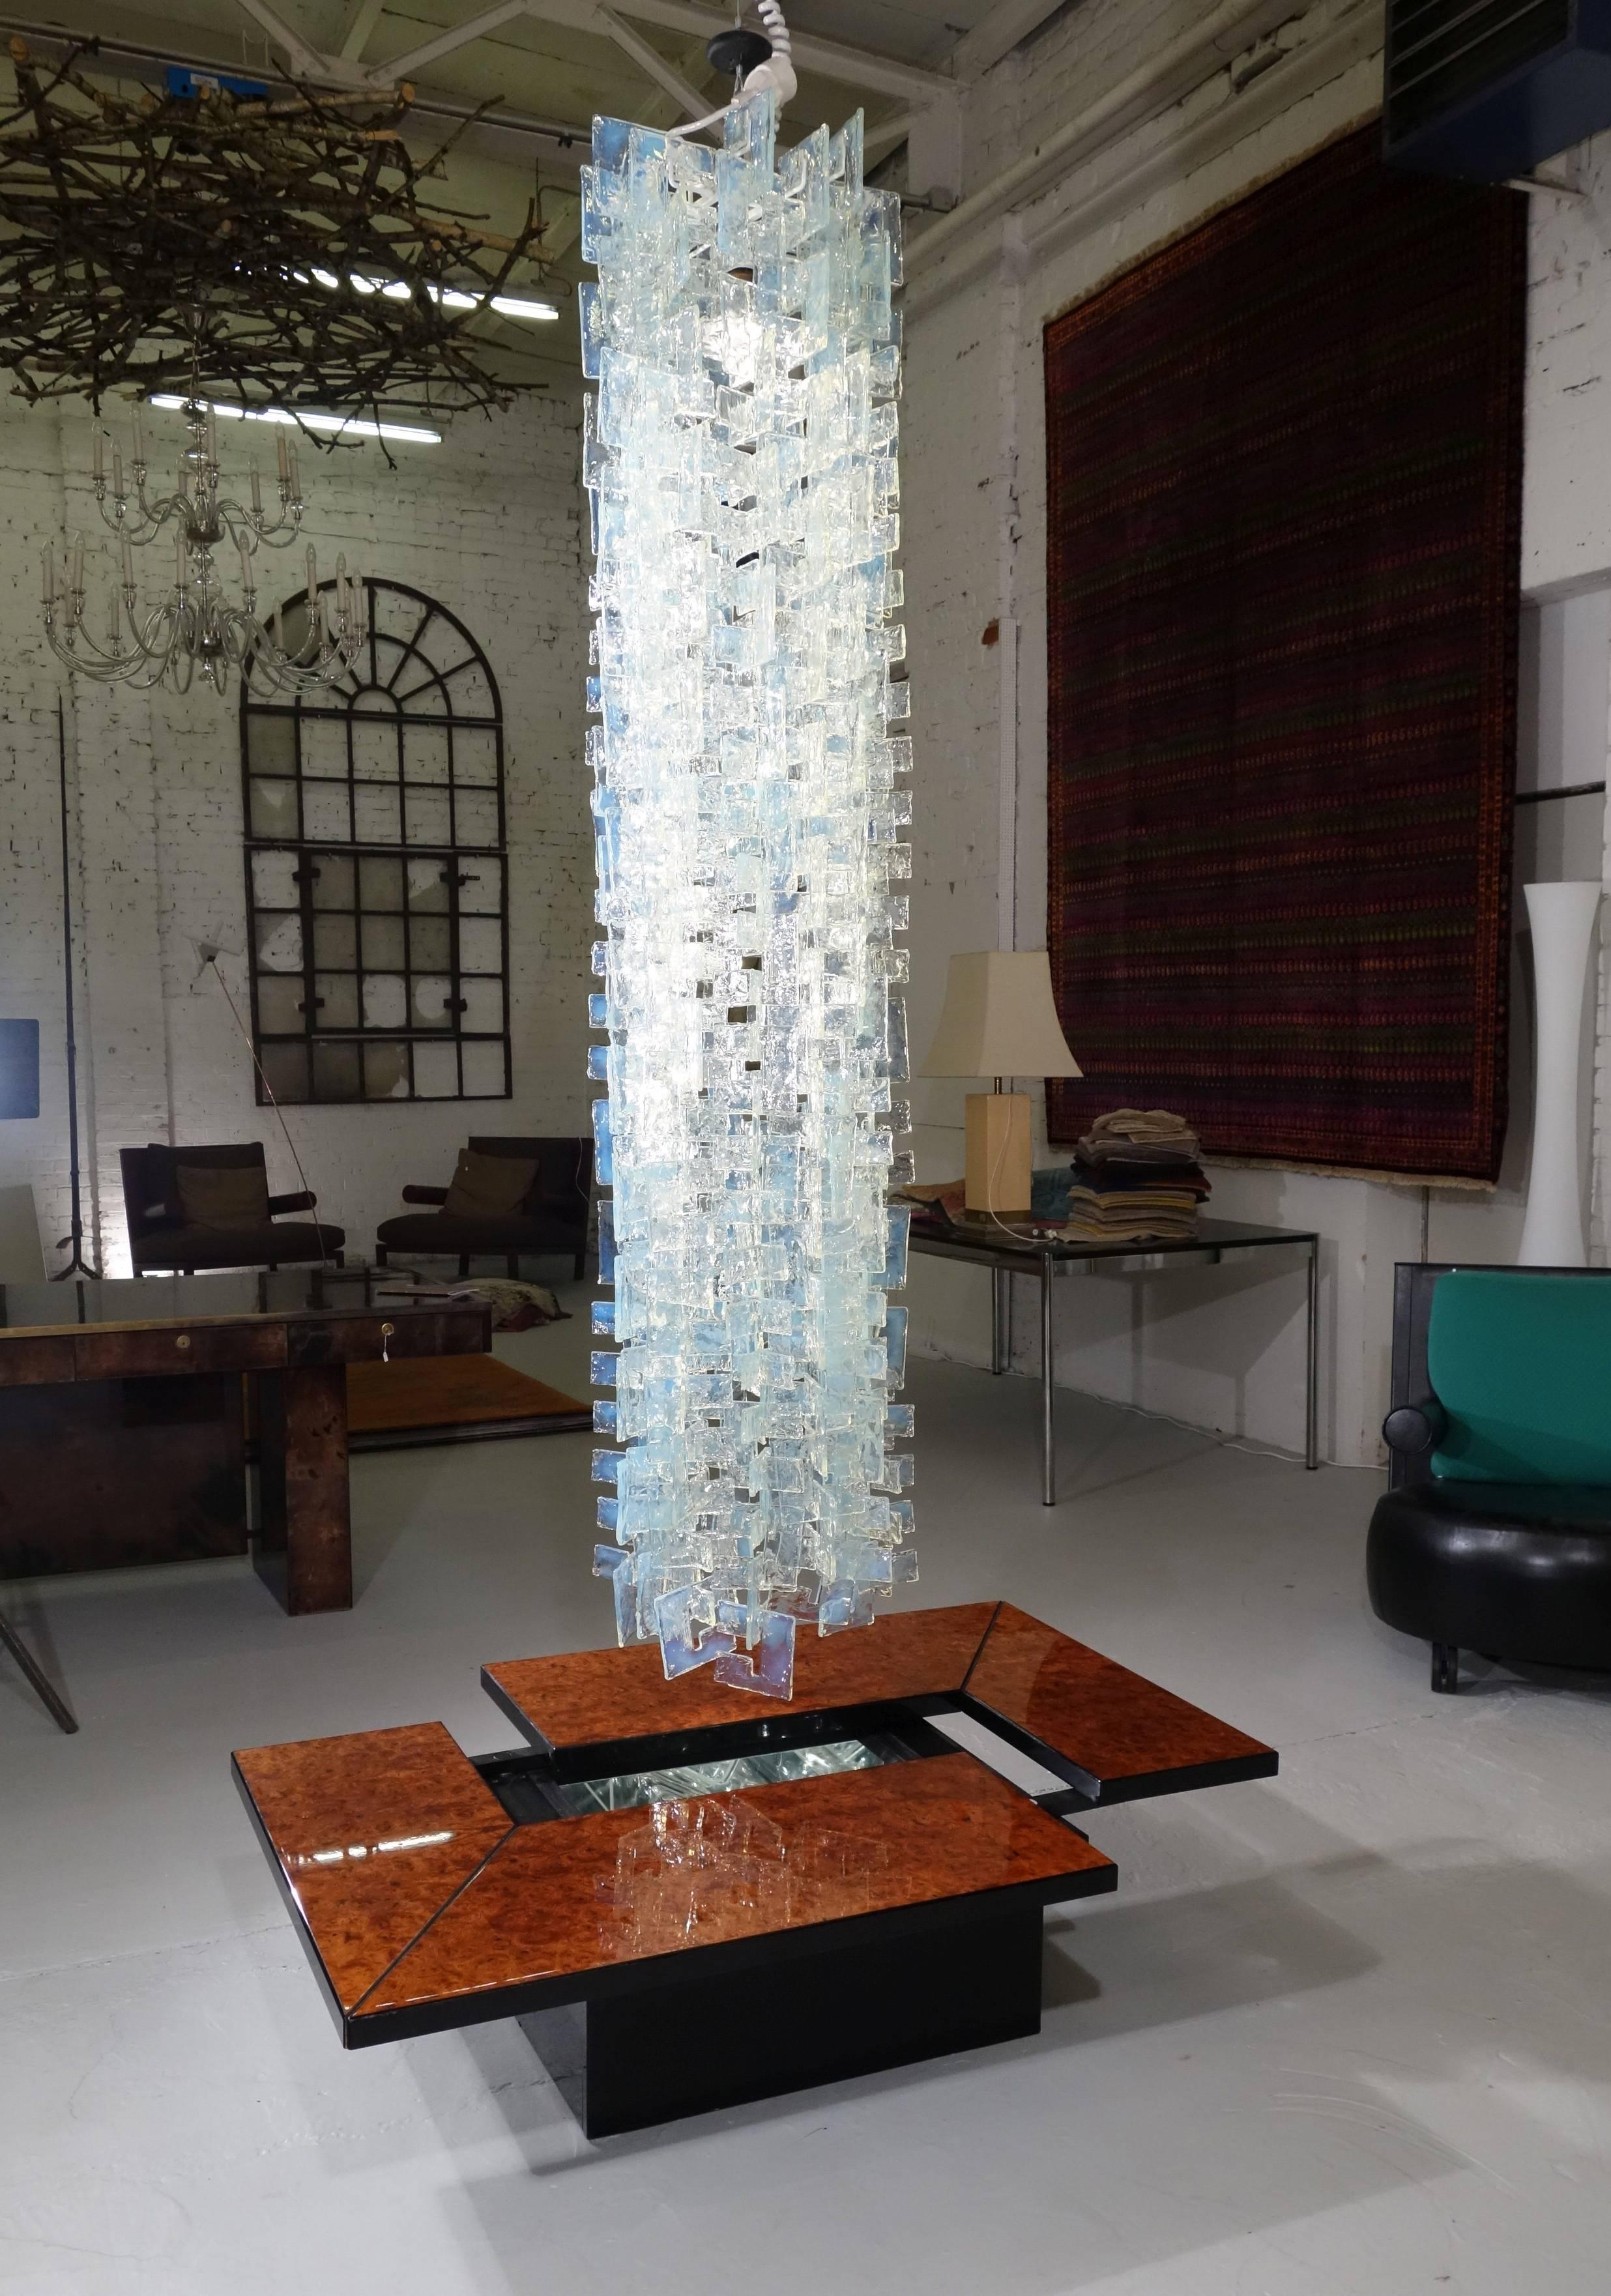 Large opalescent handblown glass chandelier in different hue by Mazzega.
More than 270 interlocking pieces.